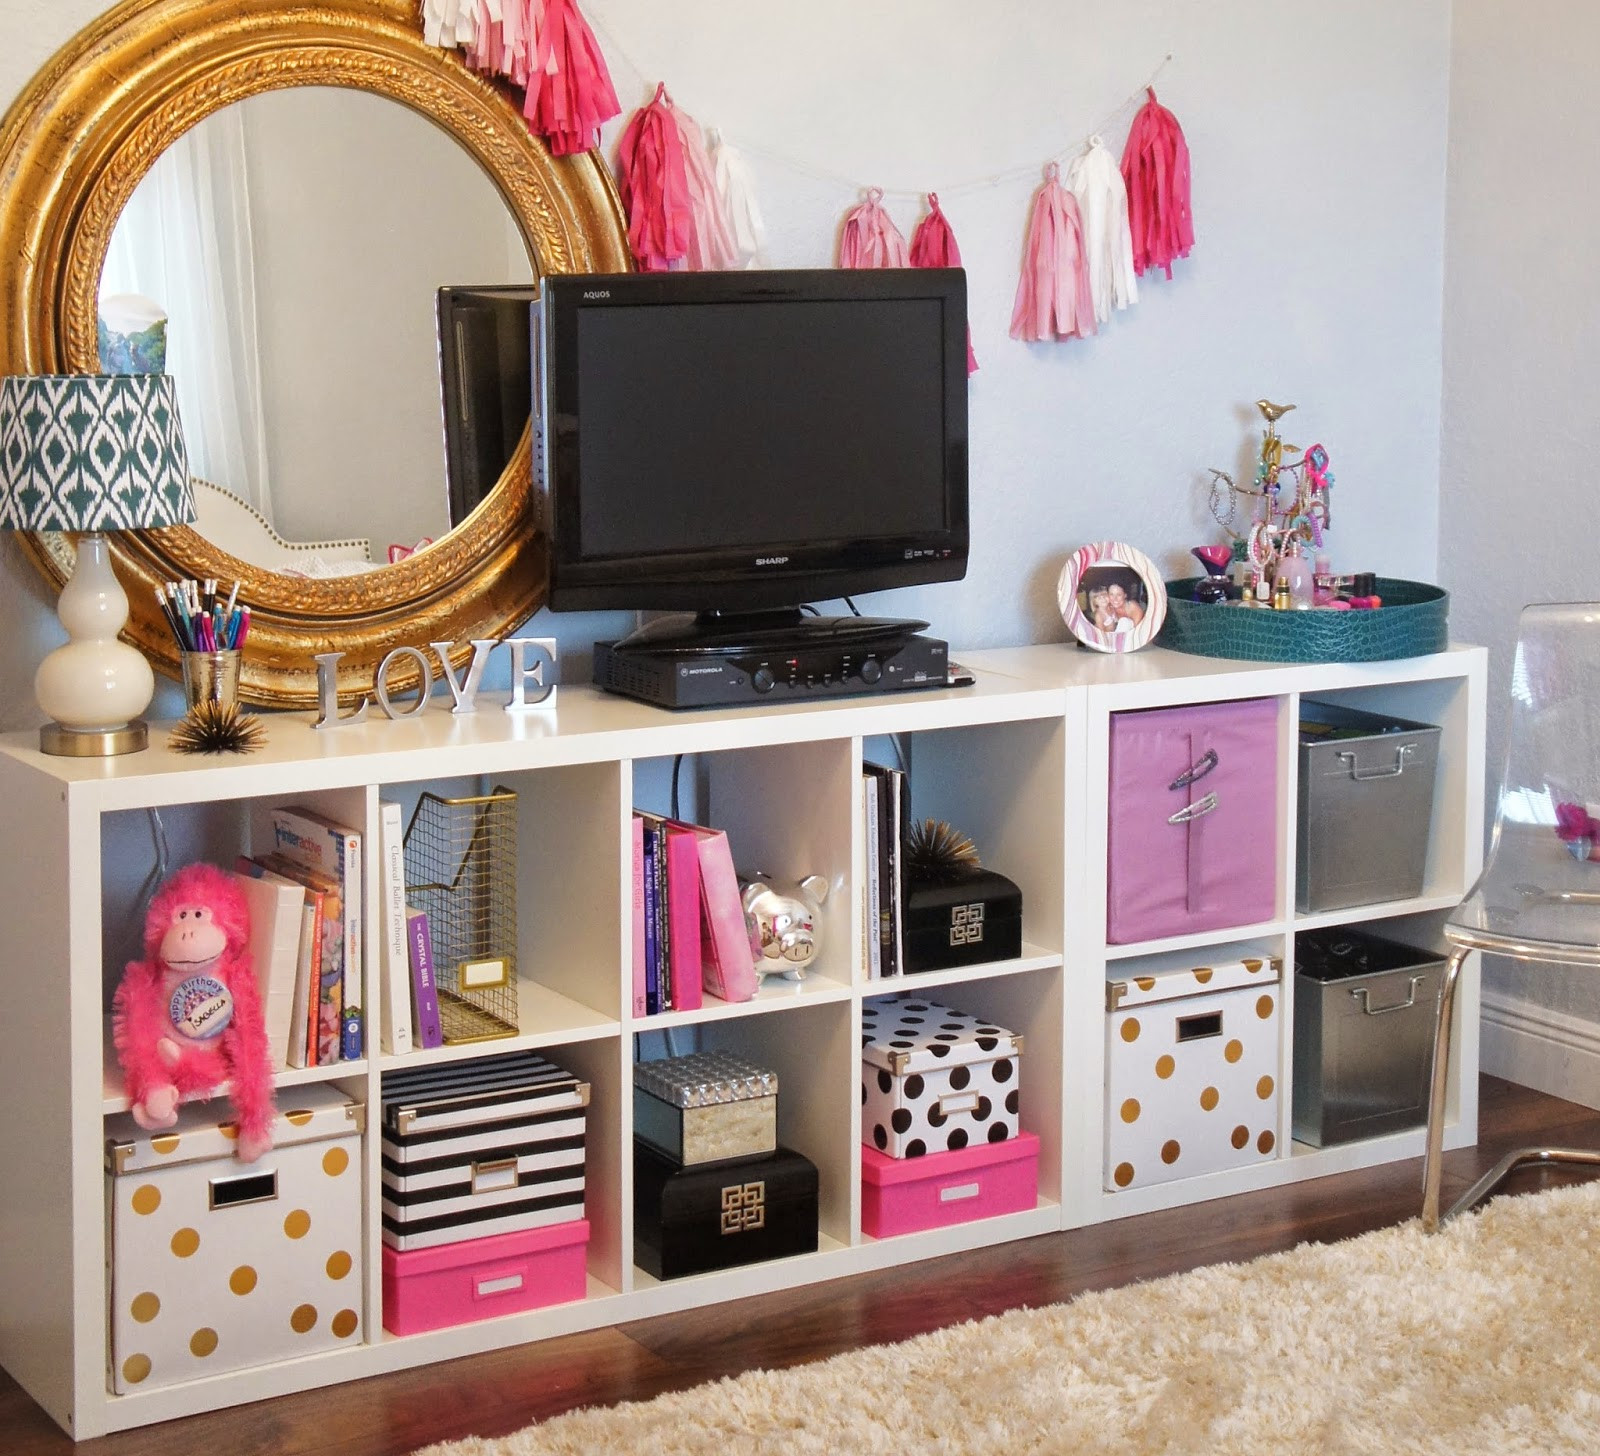 Storage For Kids Room
 The Cuban In My Coffee DIY Kate Spade Inspired Ikea